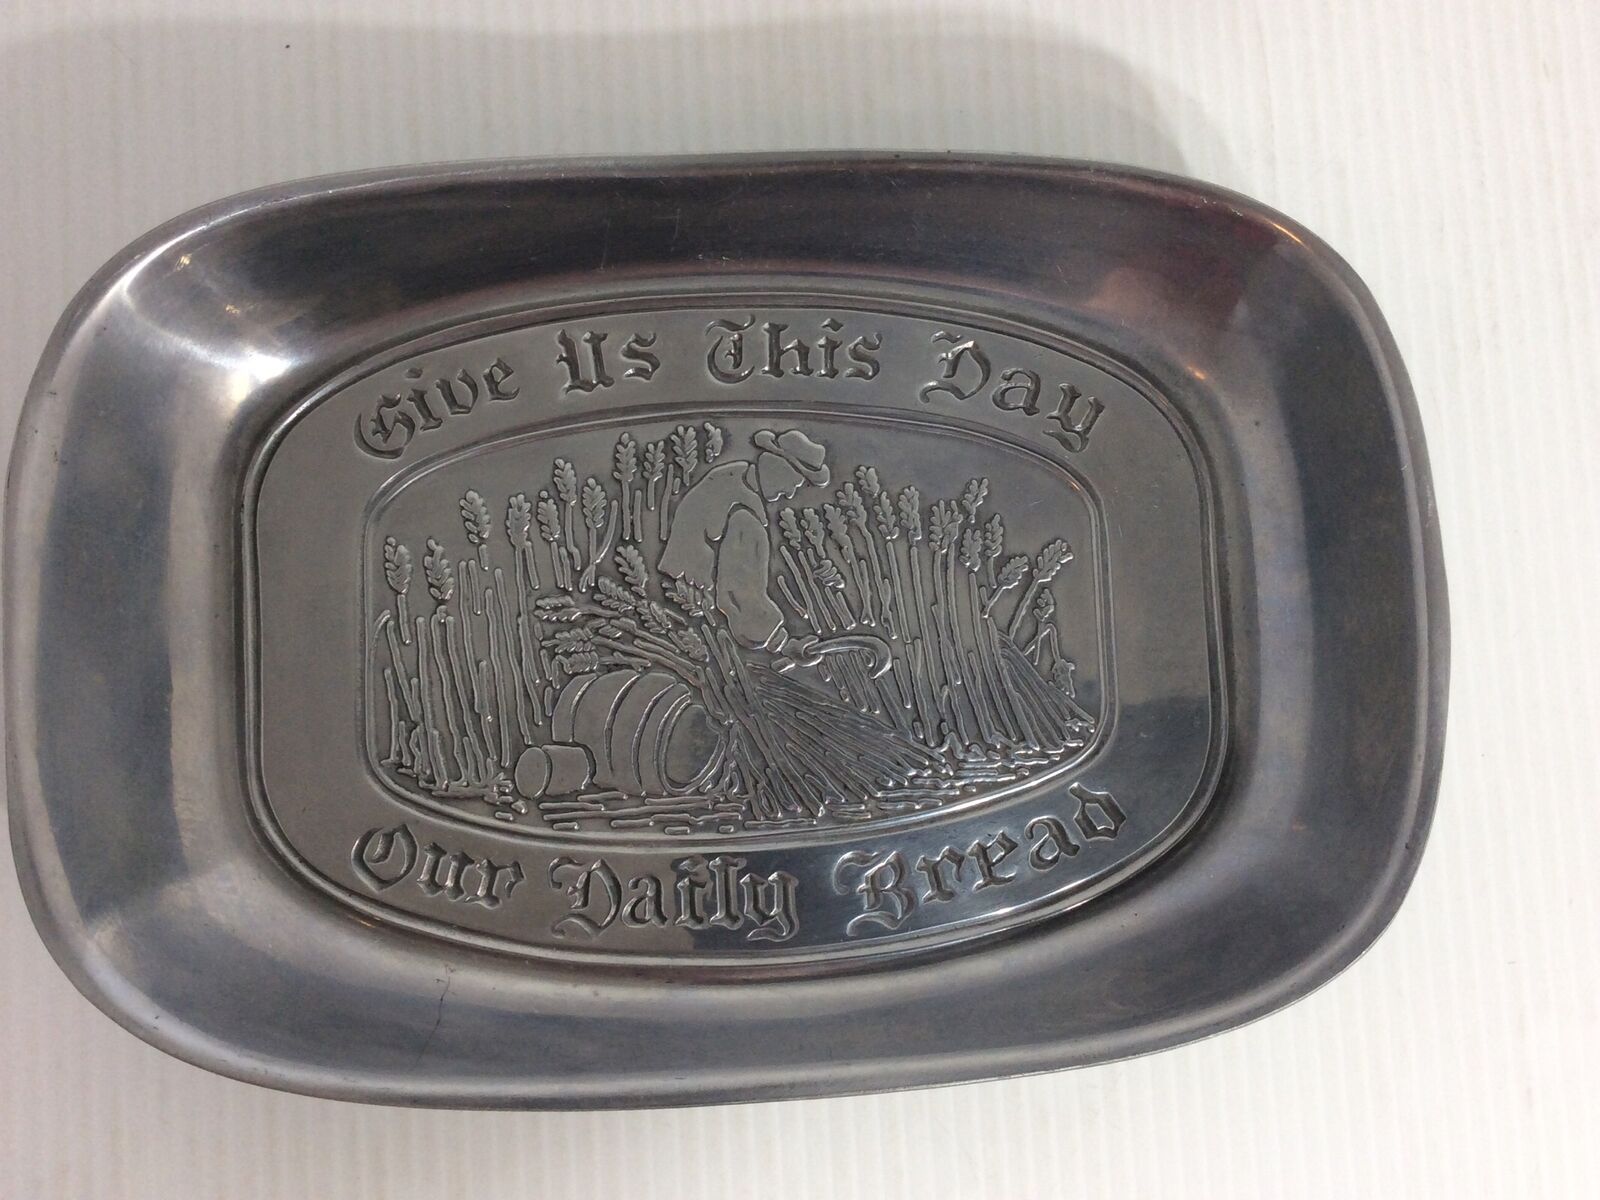 Duratale By Leonard Pewter Bread Tray Give Us This Day Our Daily Bread